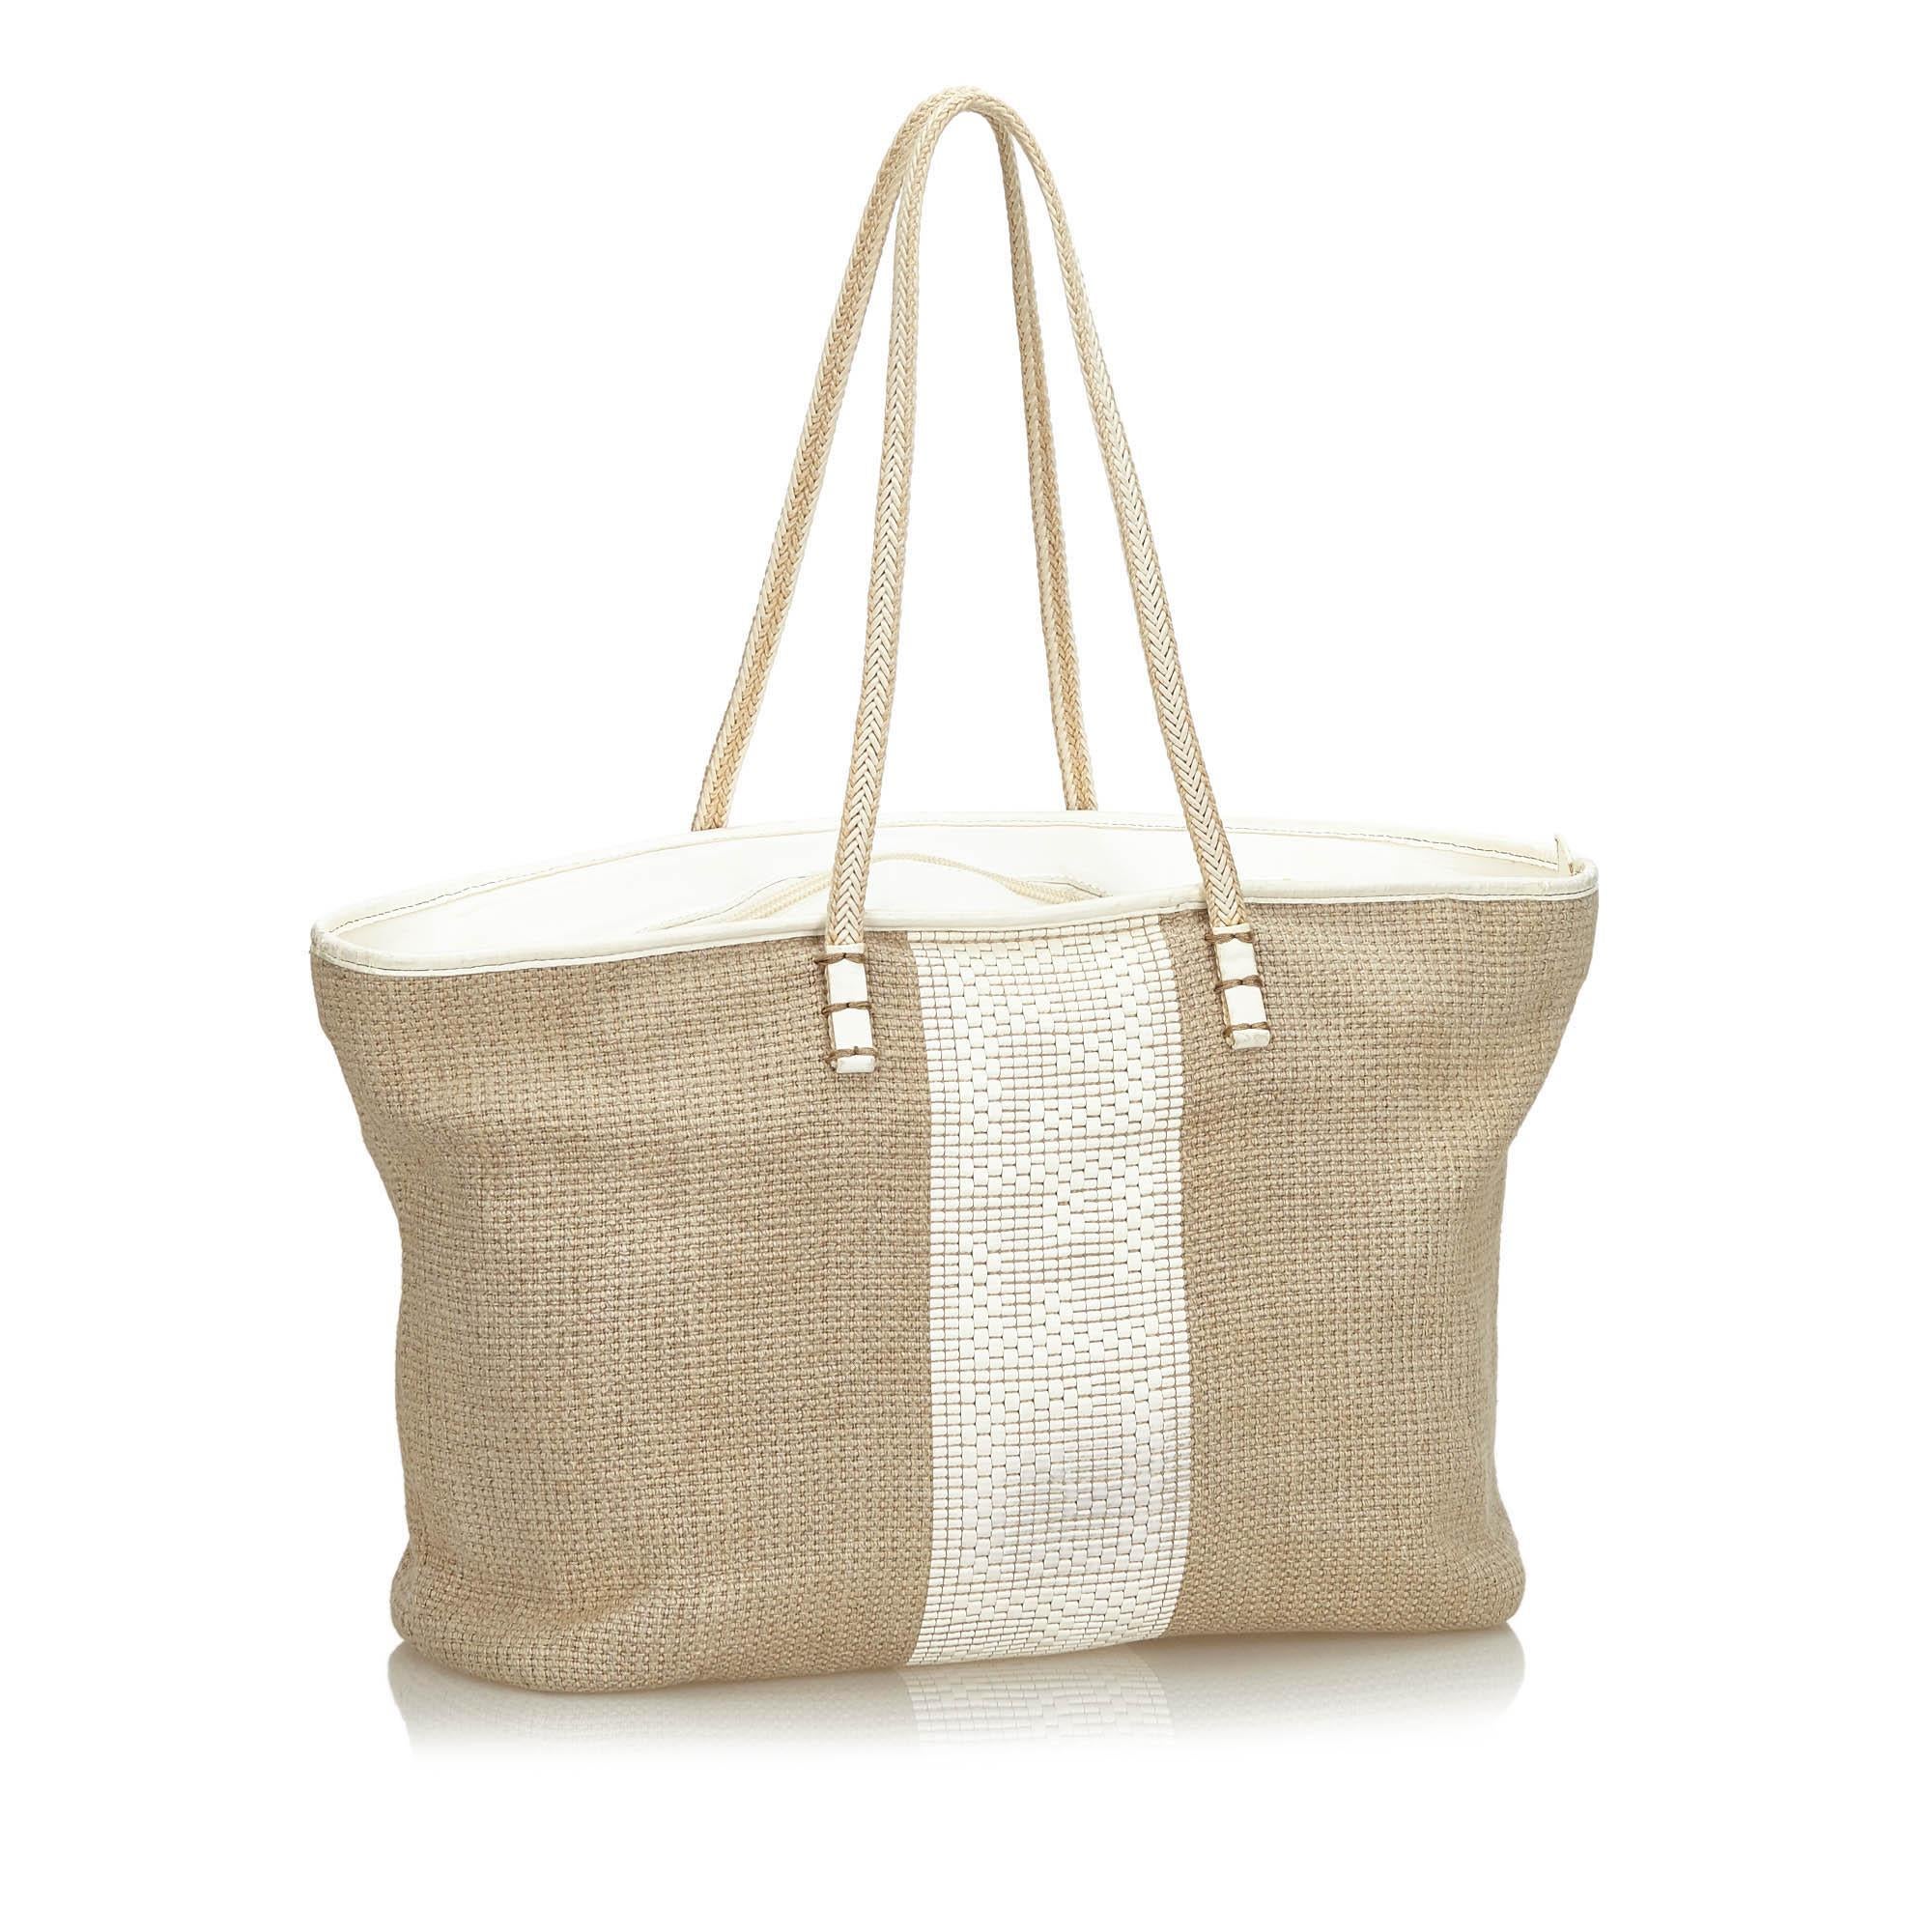 This tote features a hemp body, flat leather straps, a top zip closure, and an interior slip pocket. It carries as AB condition rating.

Inclusions: 
This item does not come with inclusions.

Dimensions:
Length: 26.00 cm
Width: 48.00 cm
Depth: 13.00